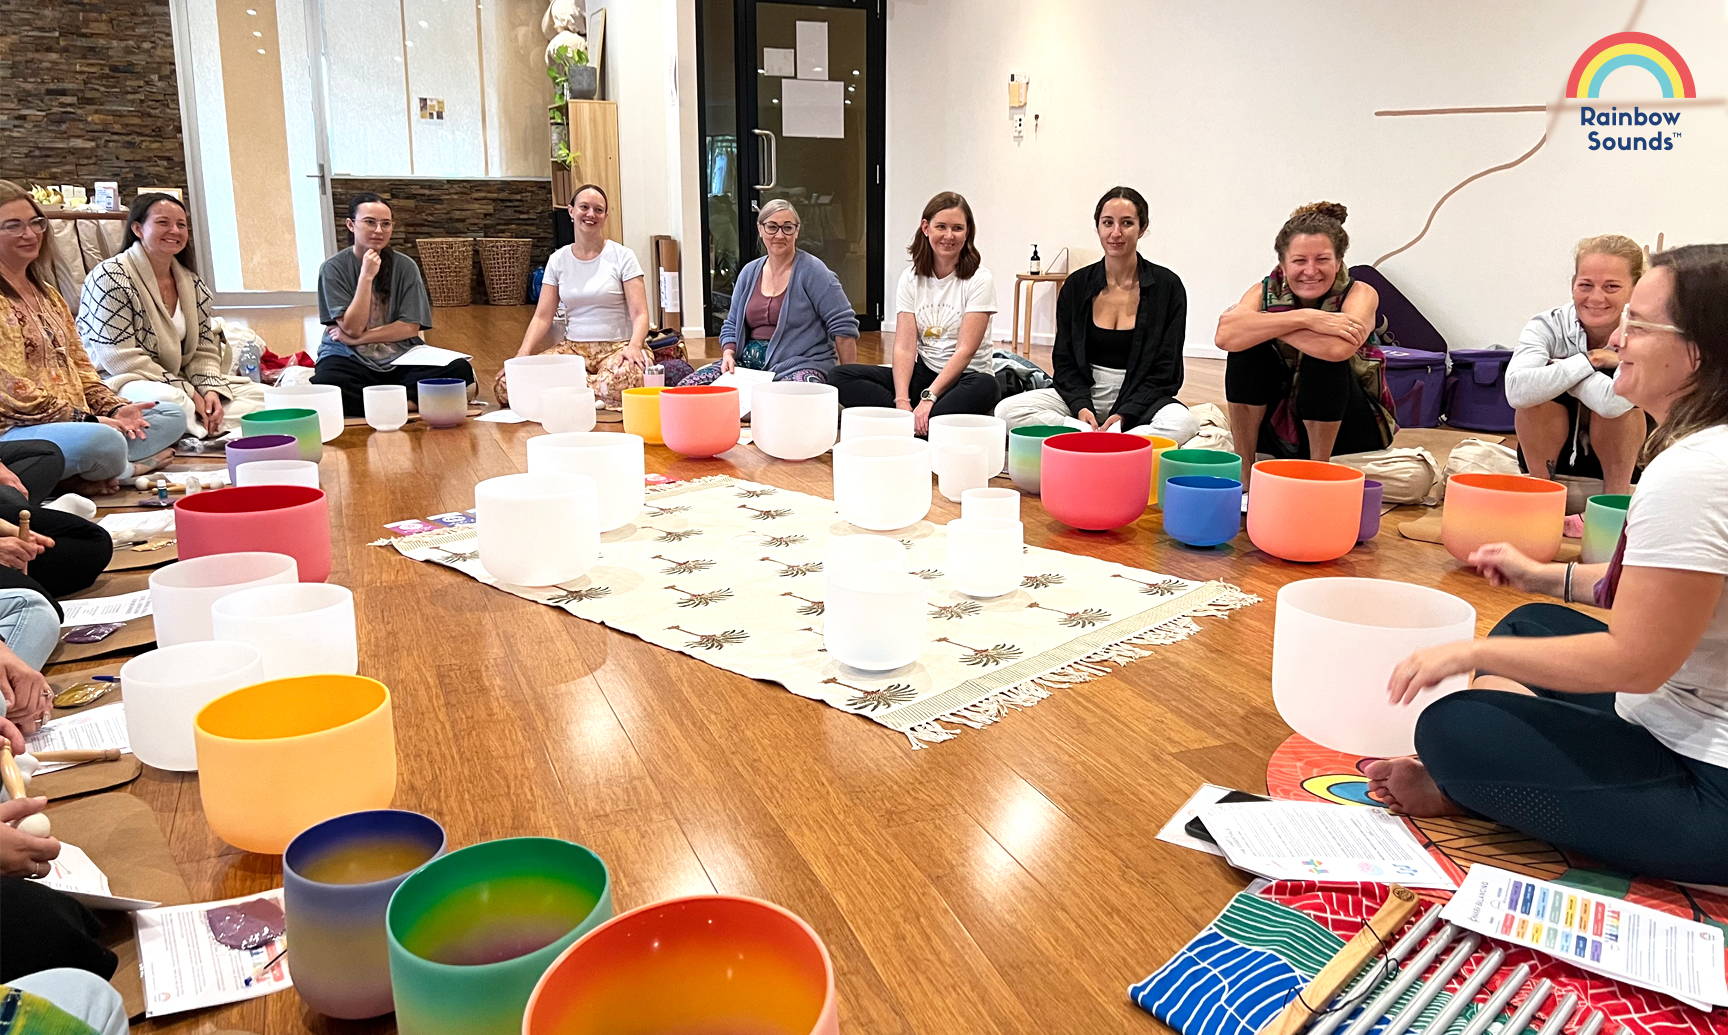 Rainbow Sounds Crystal Singing Bowls Workshop coming to Ormeau in July 2022